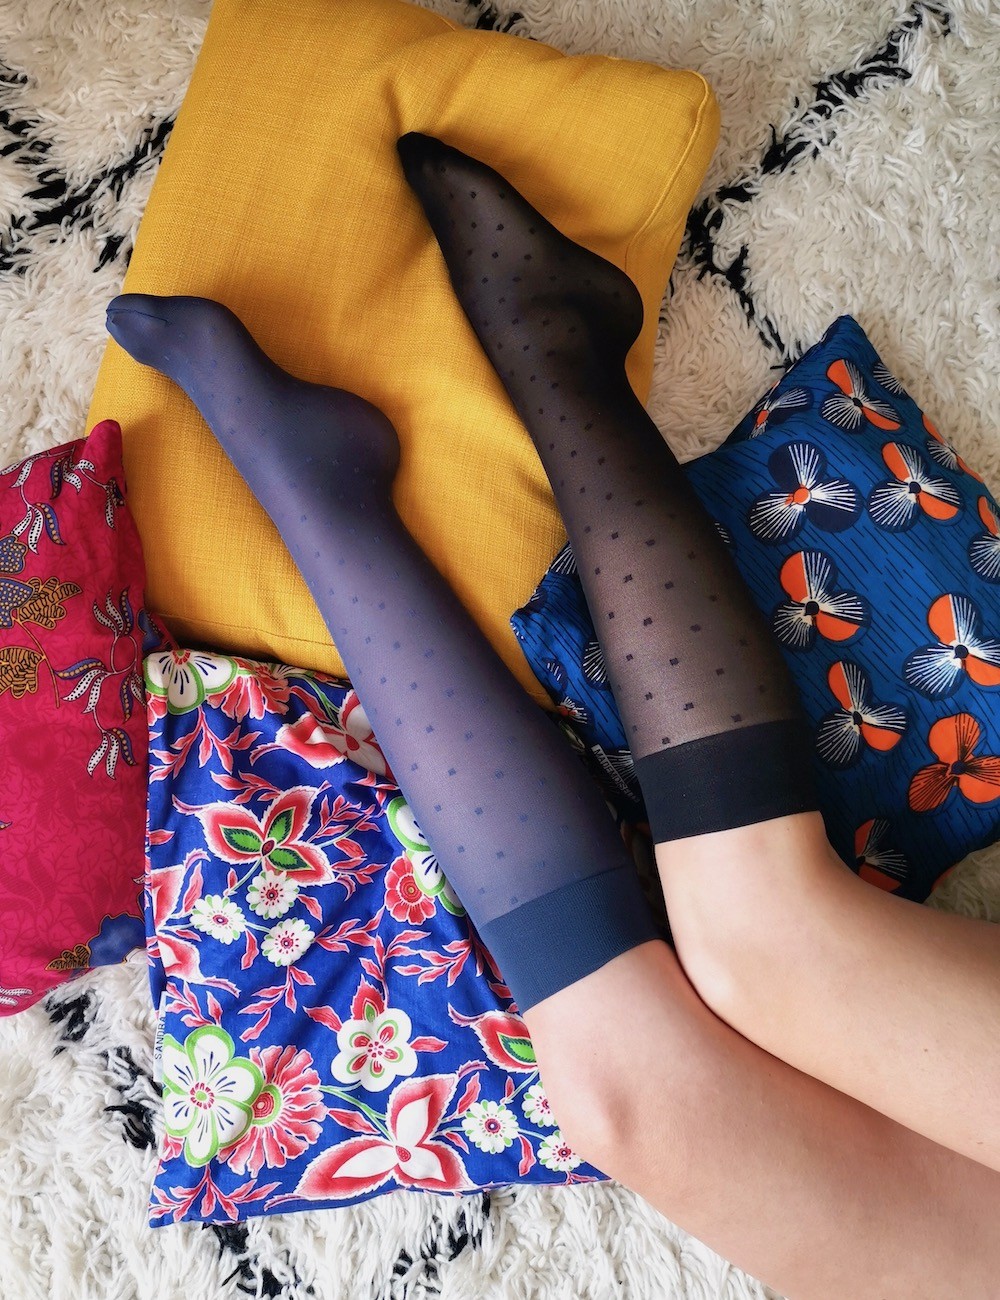 The perfect knee-highs - light legs, comfortable, non-compressive, black or stormy blue with little square pattern